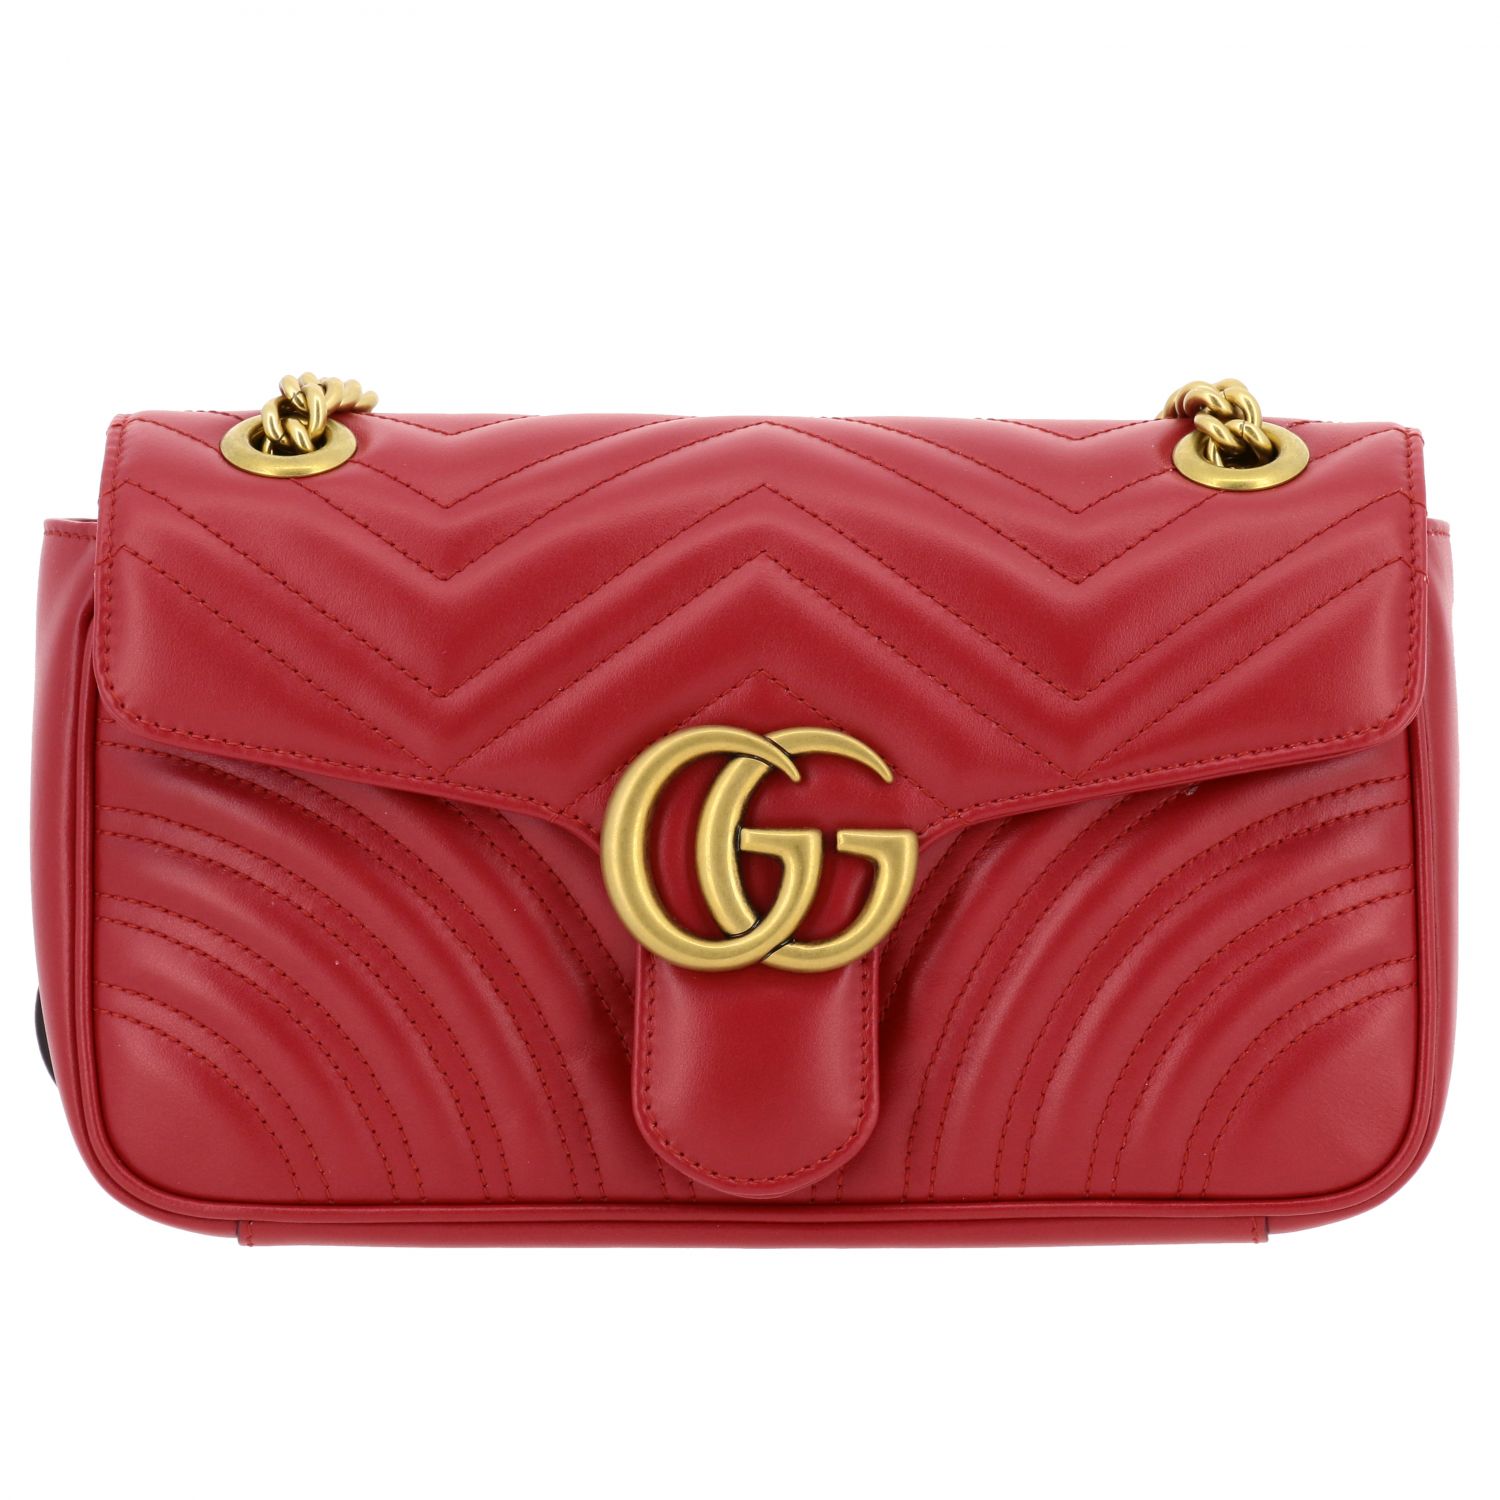 GUCCI: Marmont shoulder bag in chevron leather with monogram - Red ...